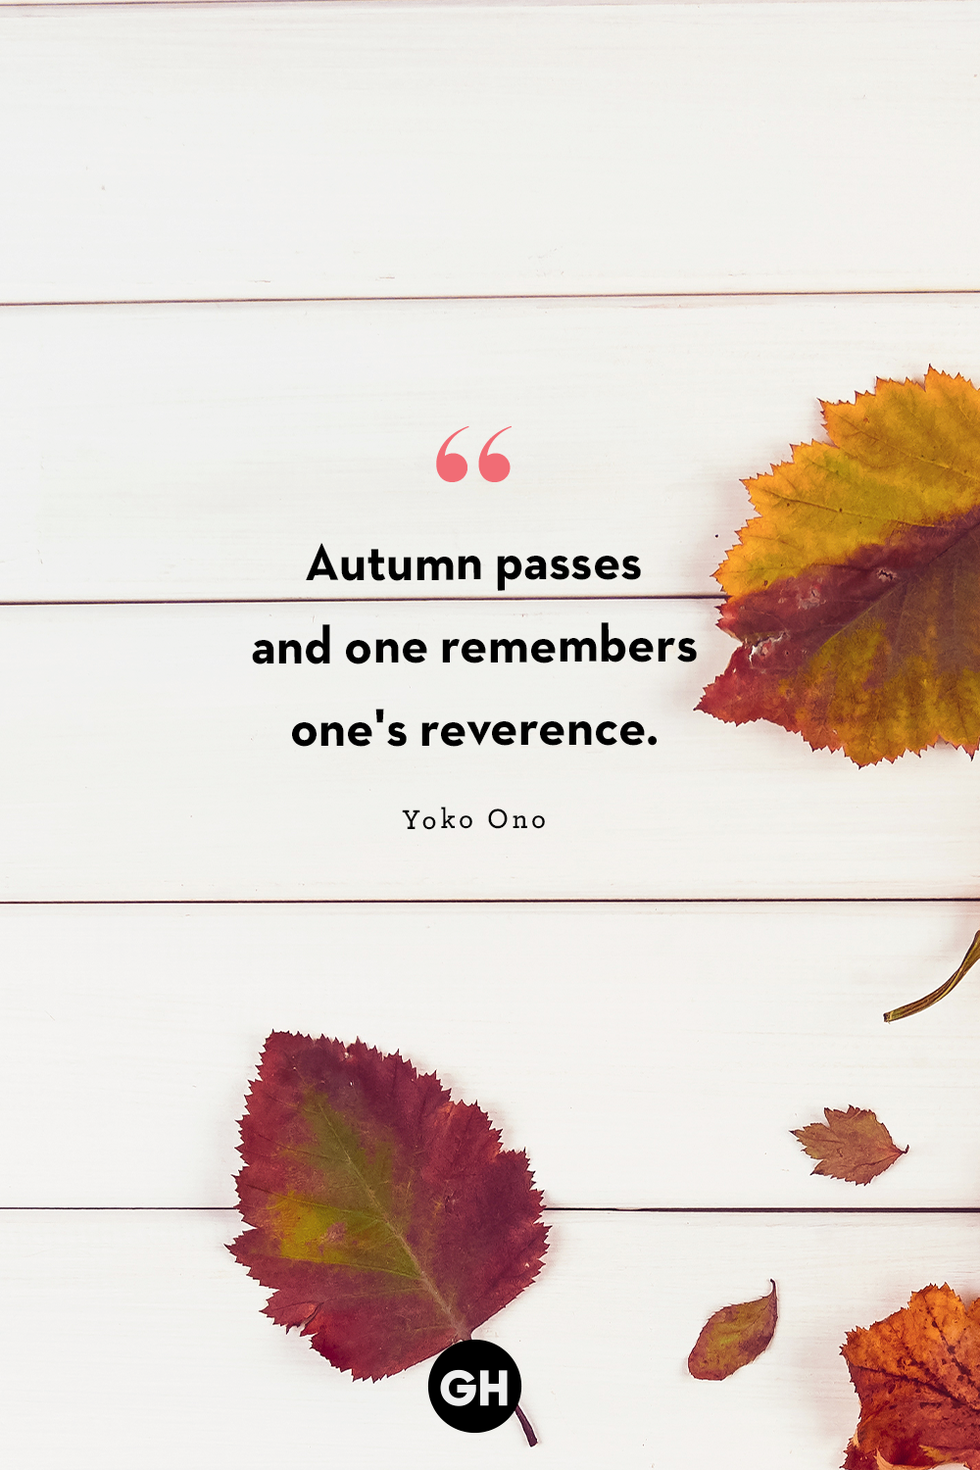 "autumn passes and one remembers one's reverence" —yoko ono